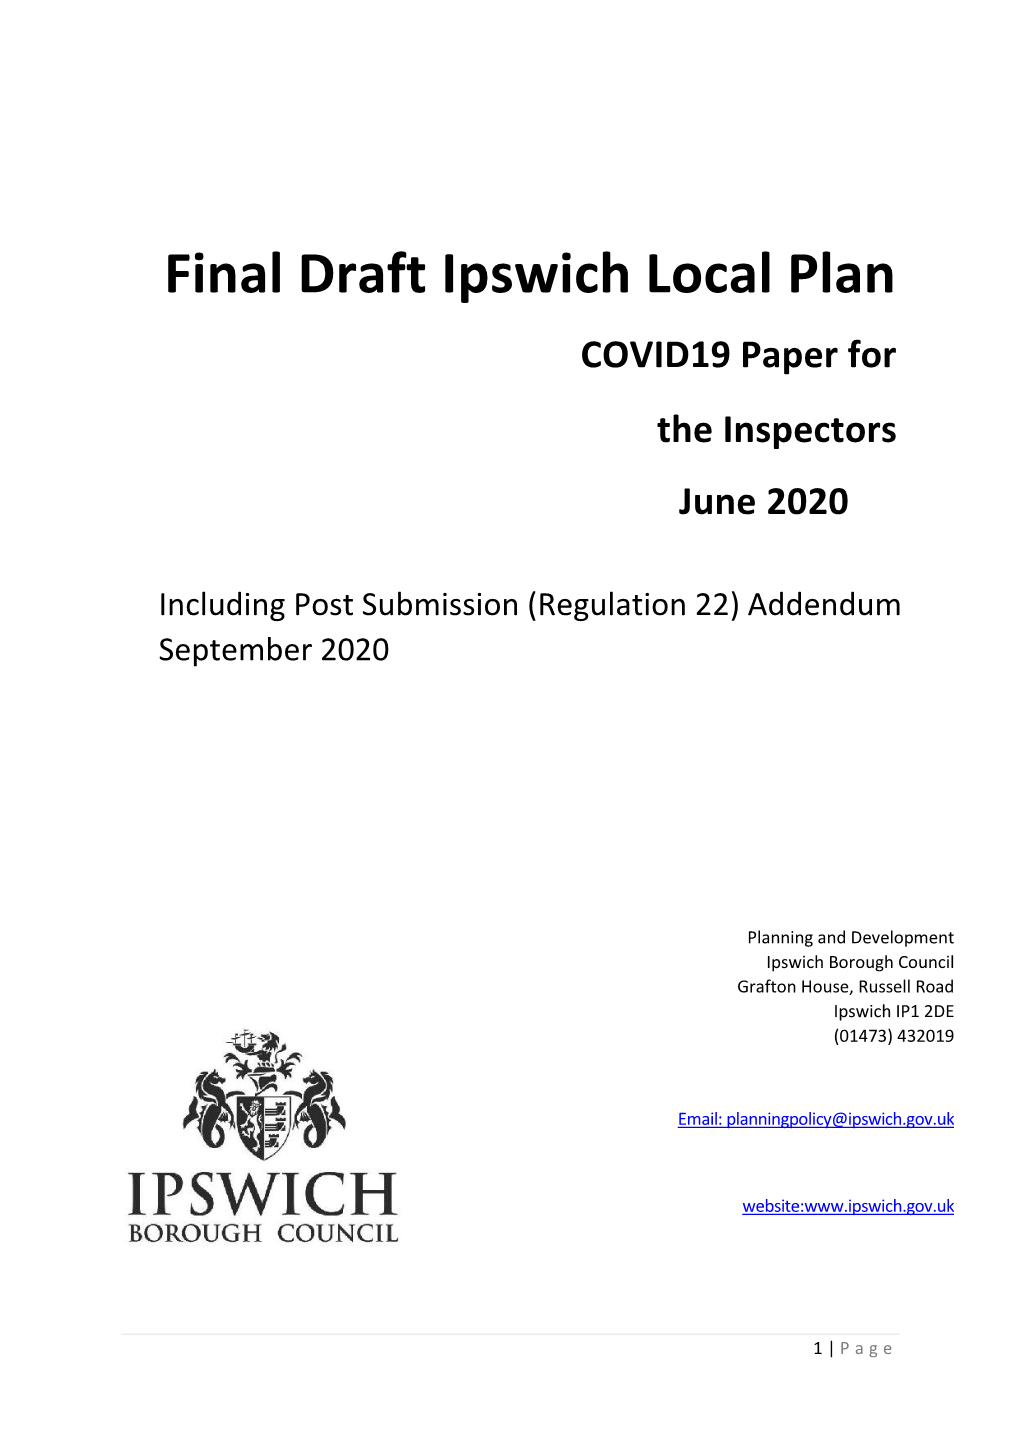 Final Draft Ipswich Local Plan COVID19 Paper for the Inspectors June 2020